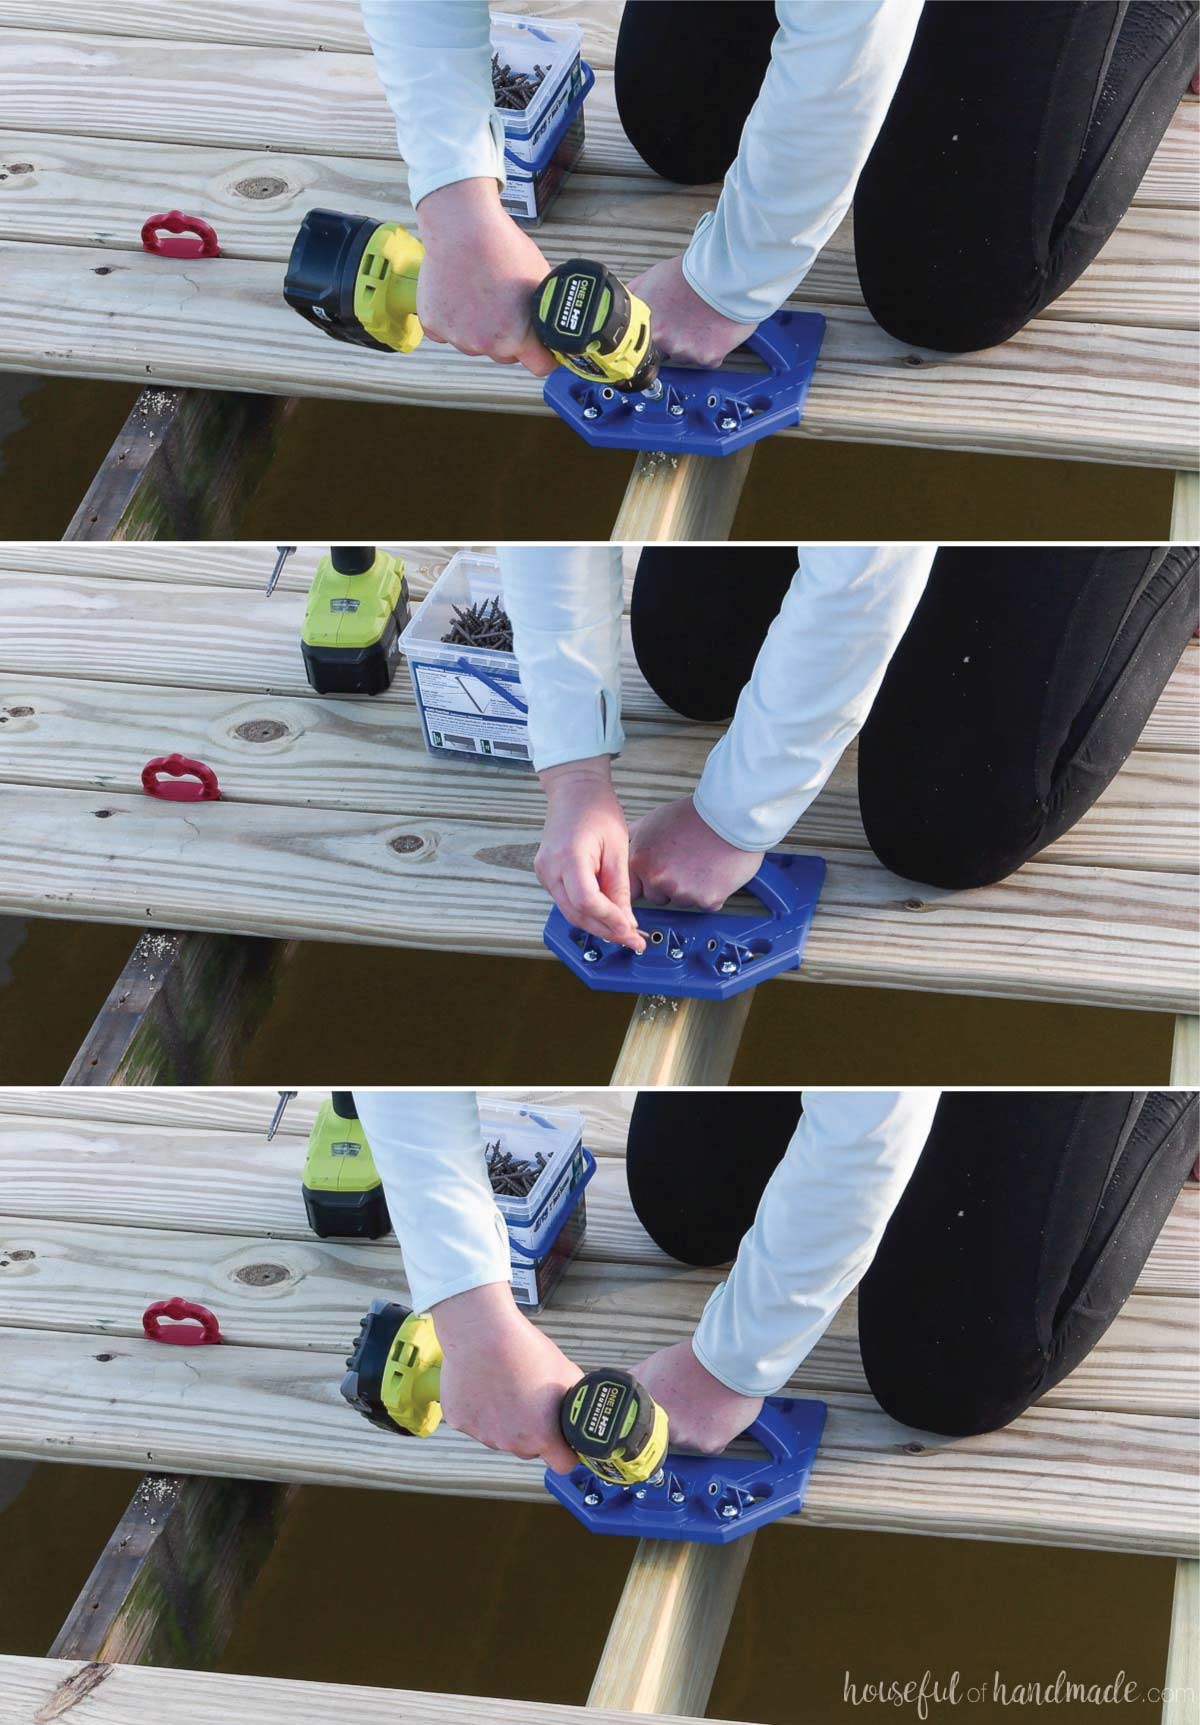 Three pictures showing the process of attaching a new deck board with the Kreg Deck jig.